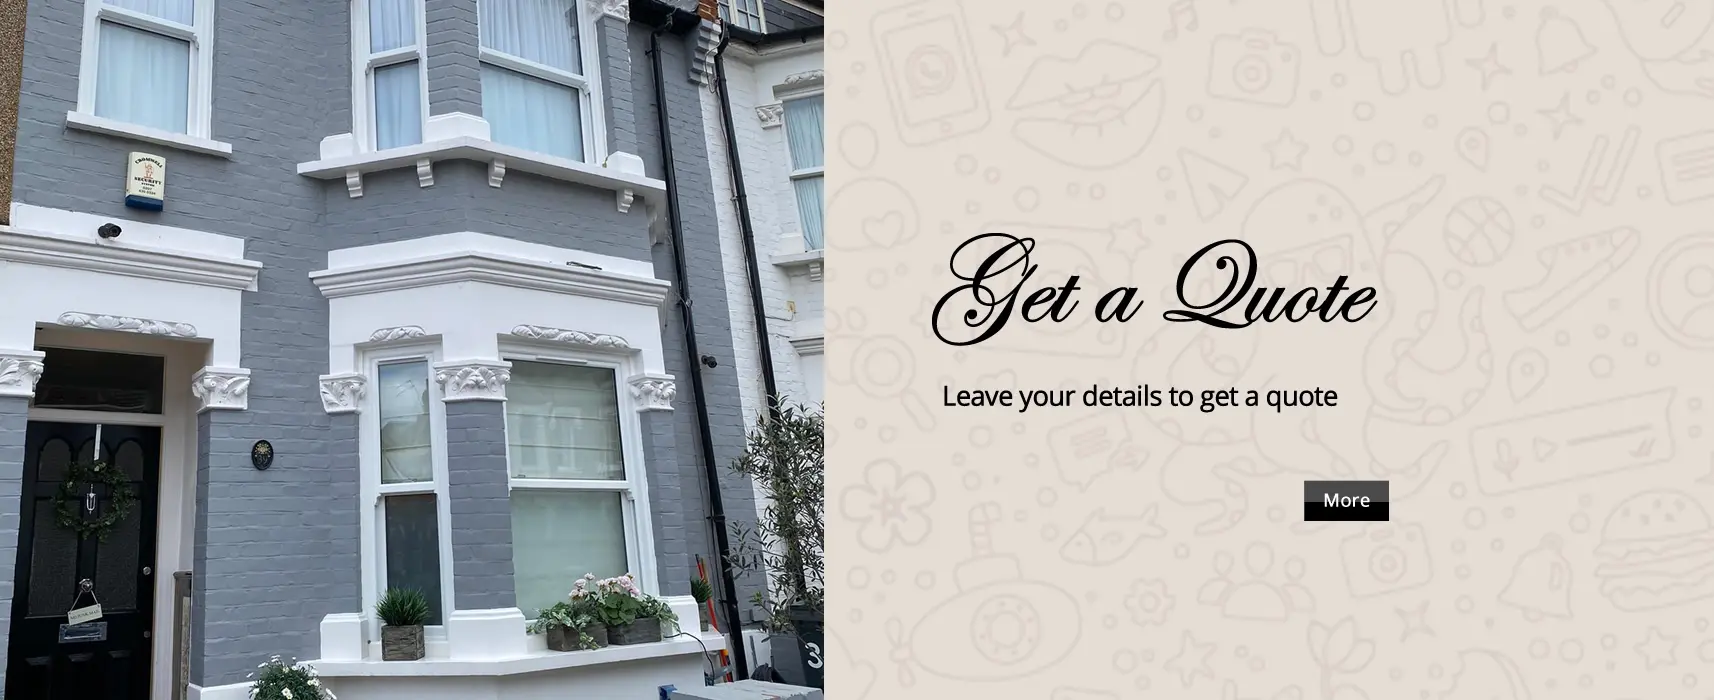 we now offer virtual window quotes for our London customers so we don't have to visit your property to give you an in principle price